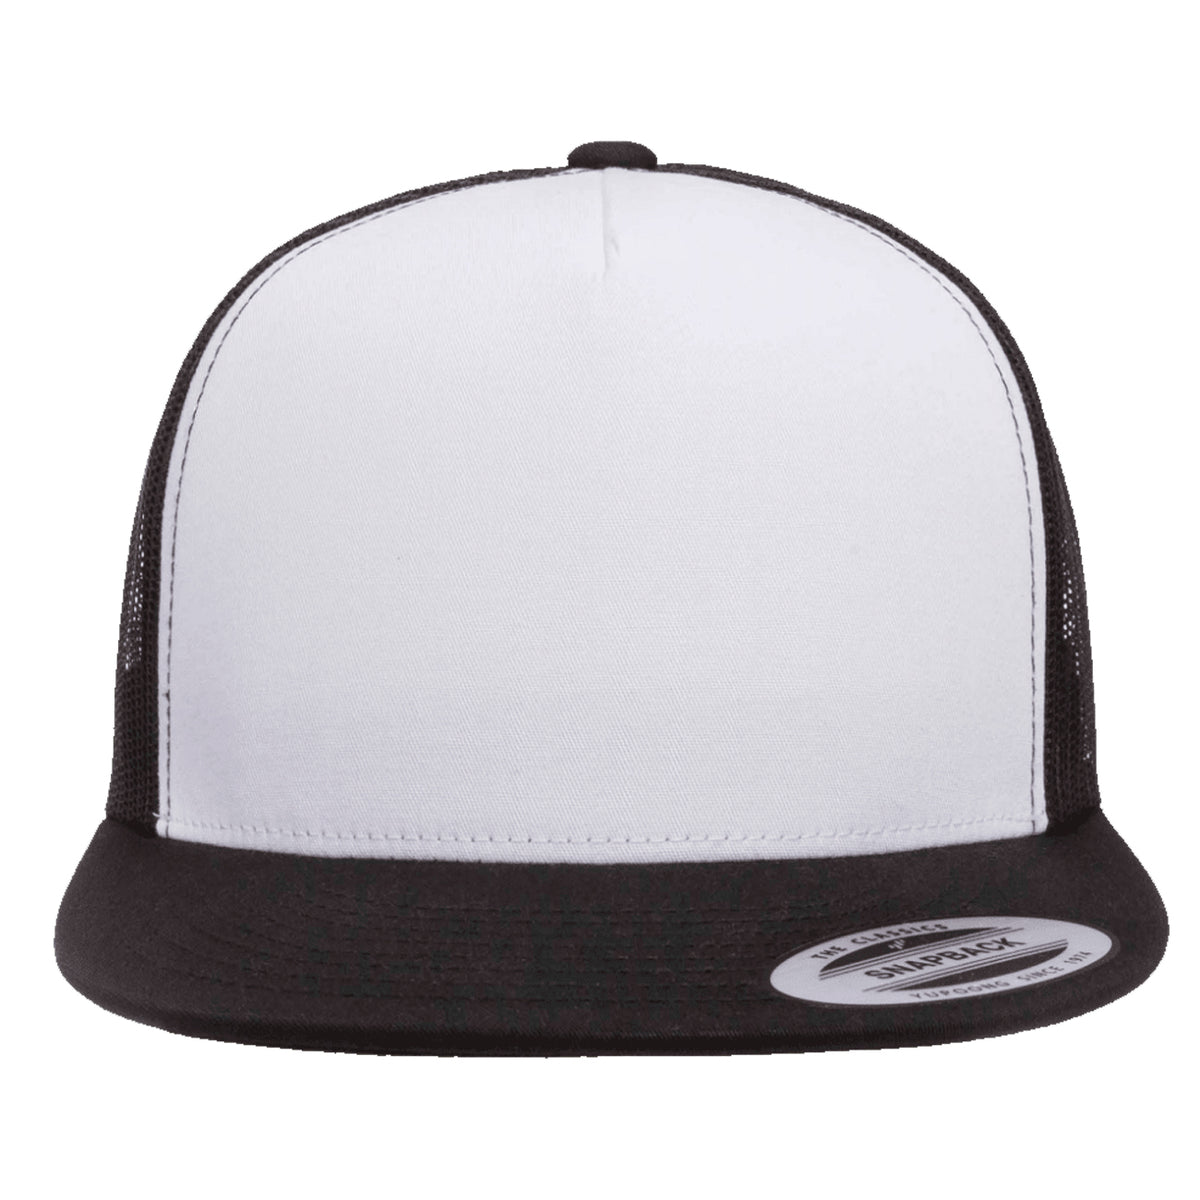 Flexfit Yupoong Classic White Front Adjustable – Cap Panel 2040USA Trucker